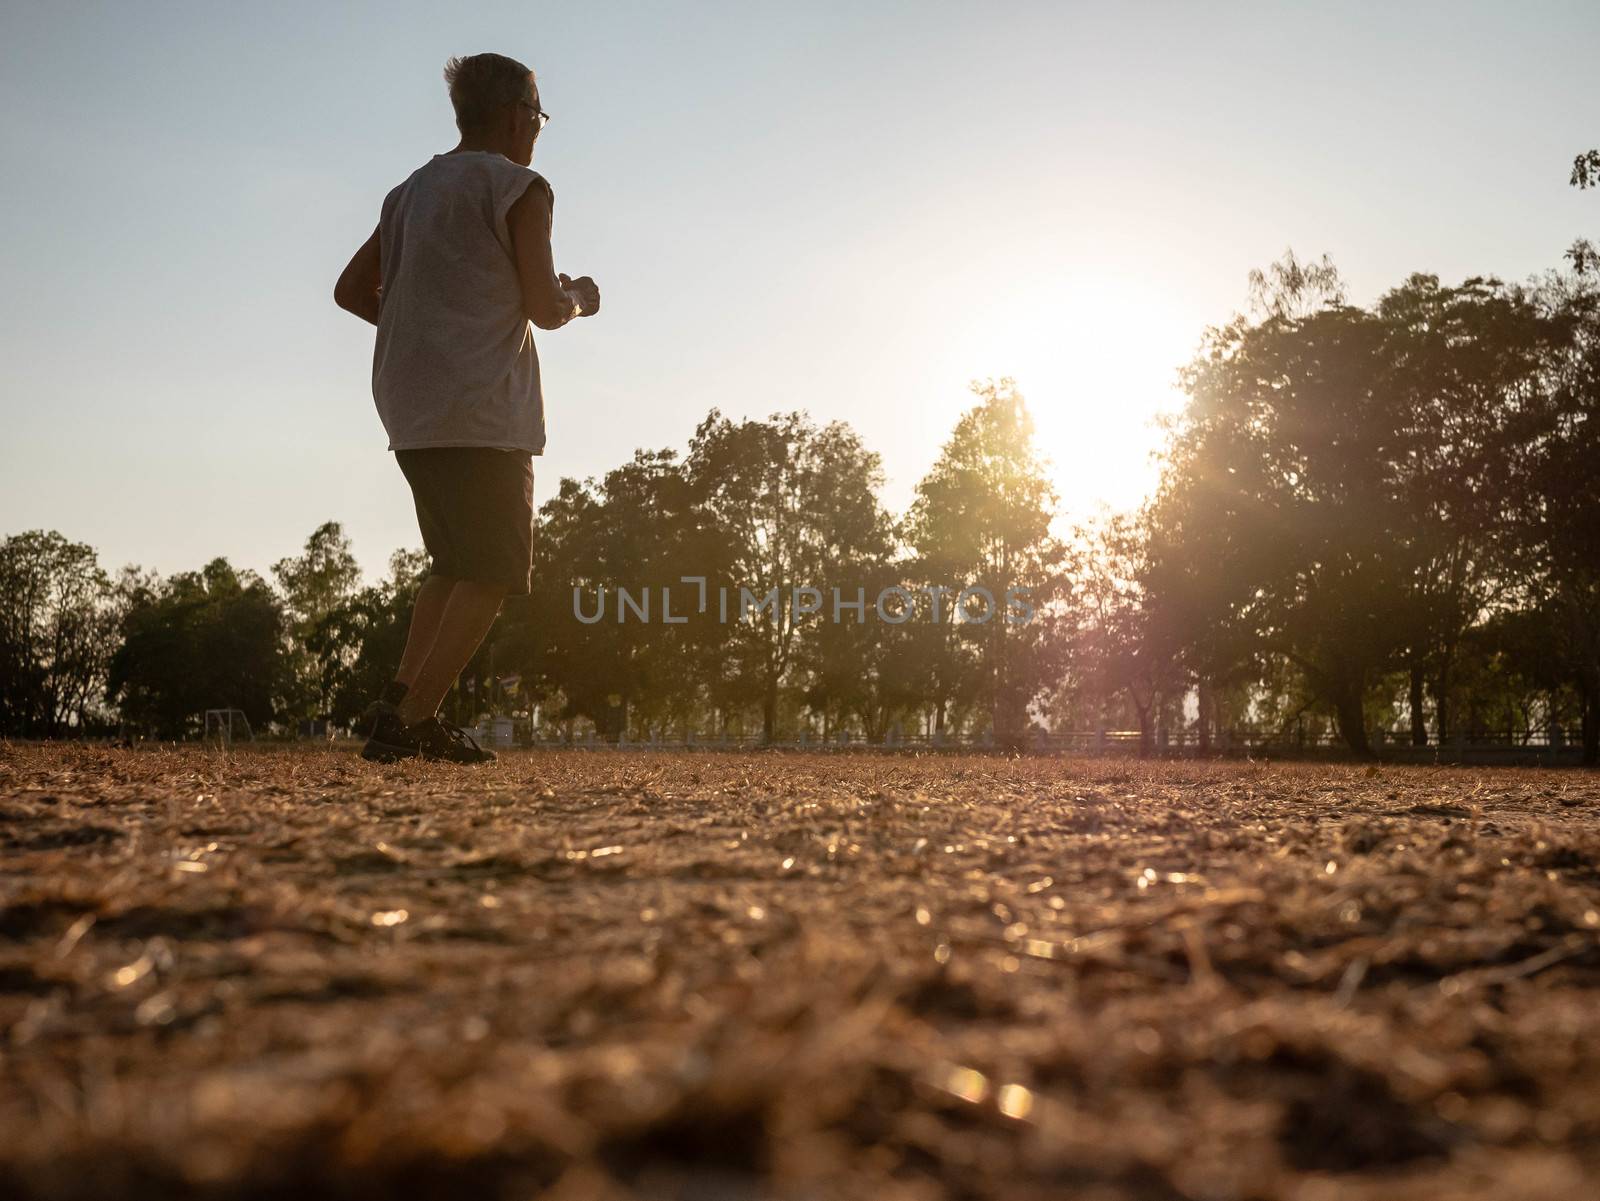 Asian senior man jogging in the park over sunset sky background. Healthy lifestyle and Healthcare concept.